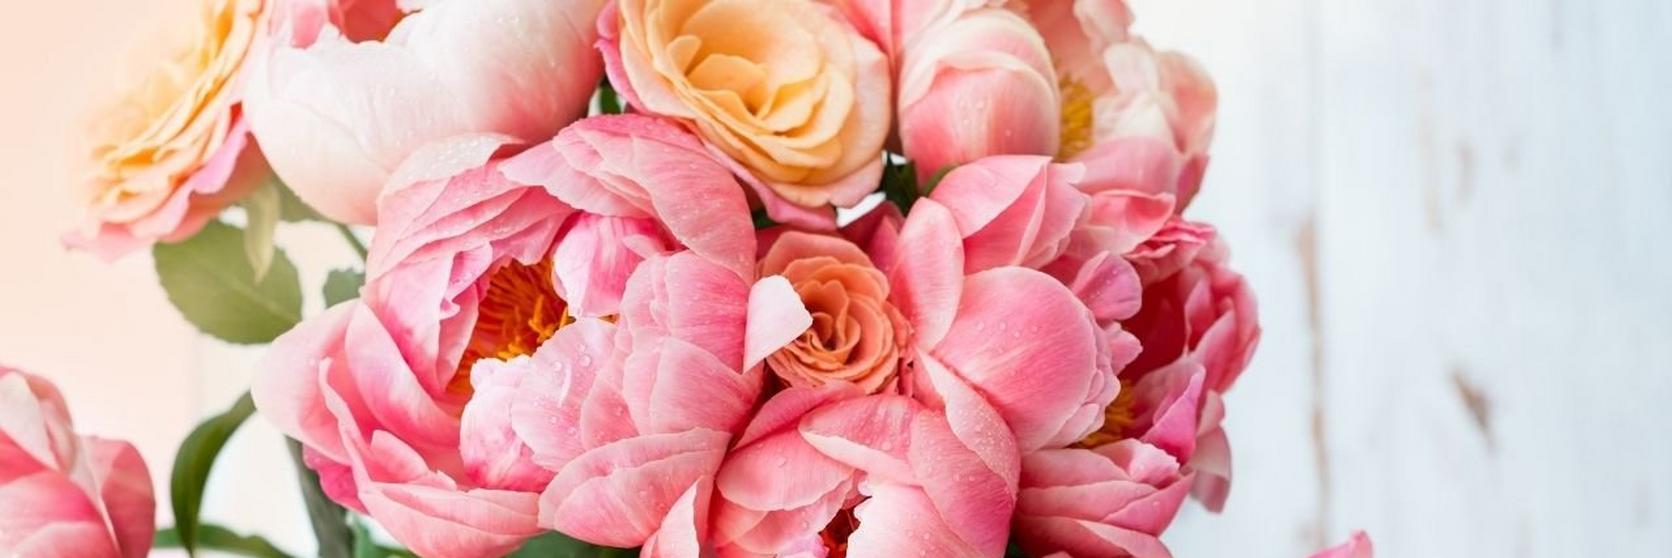 peonies-facts-that-may-surprise-you-3